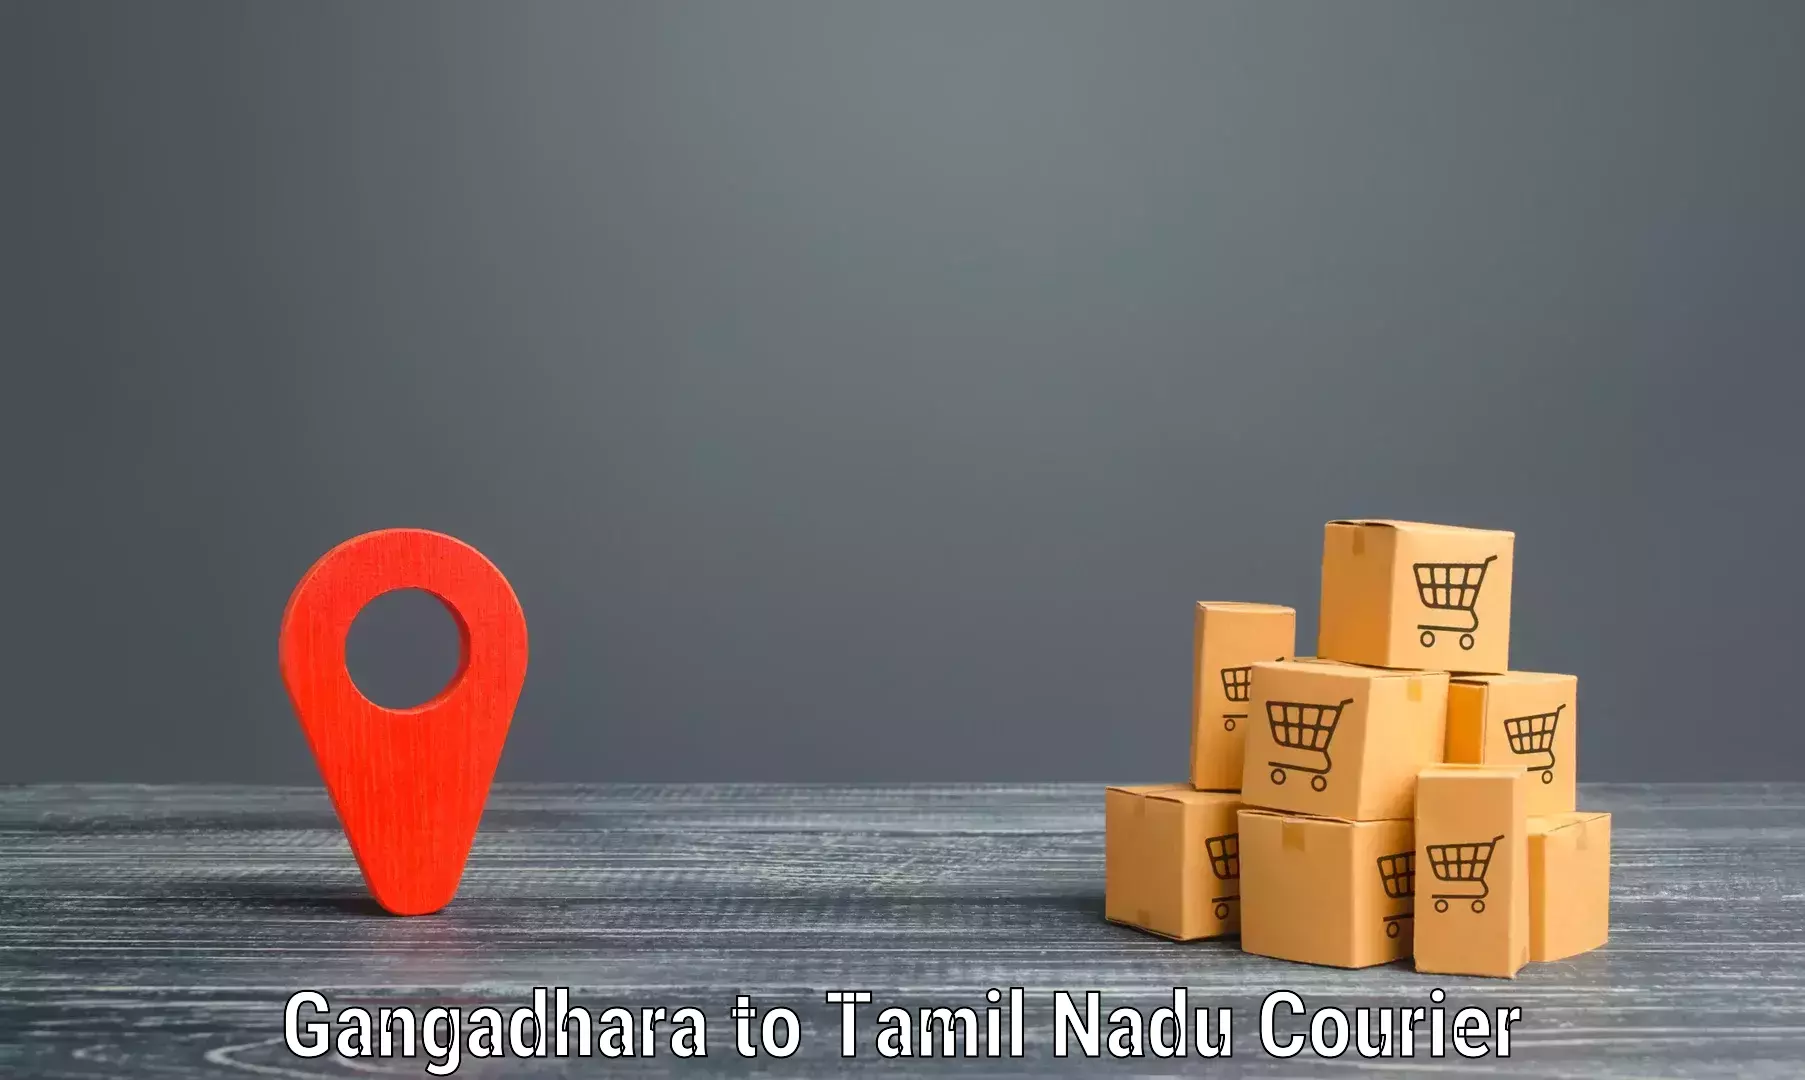 Automated parcel services Gangadhara to Perambalur